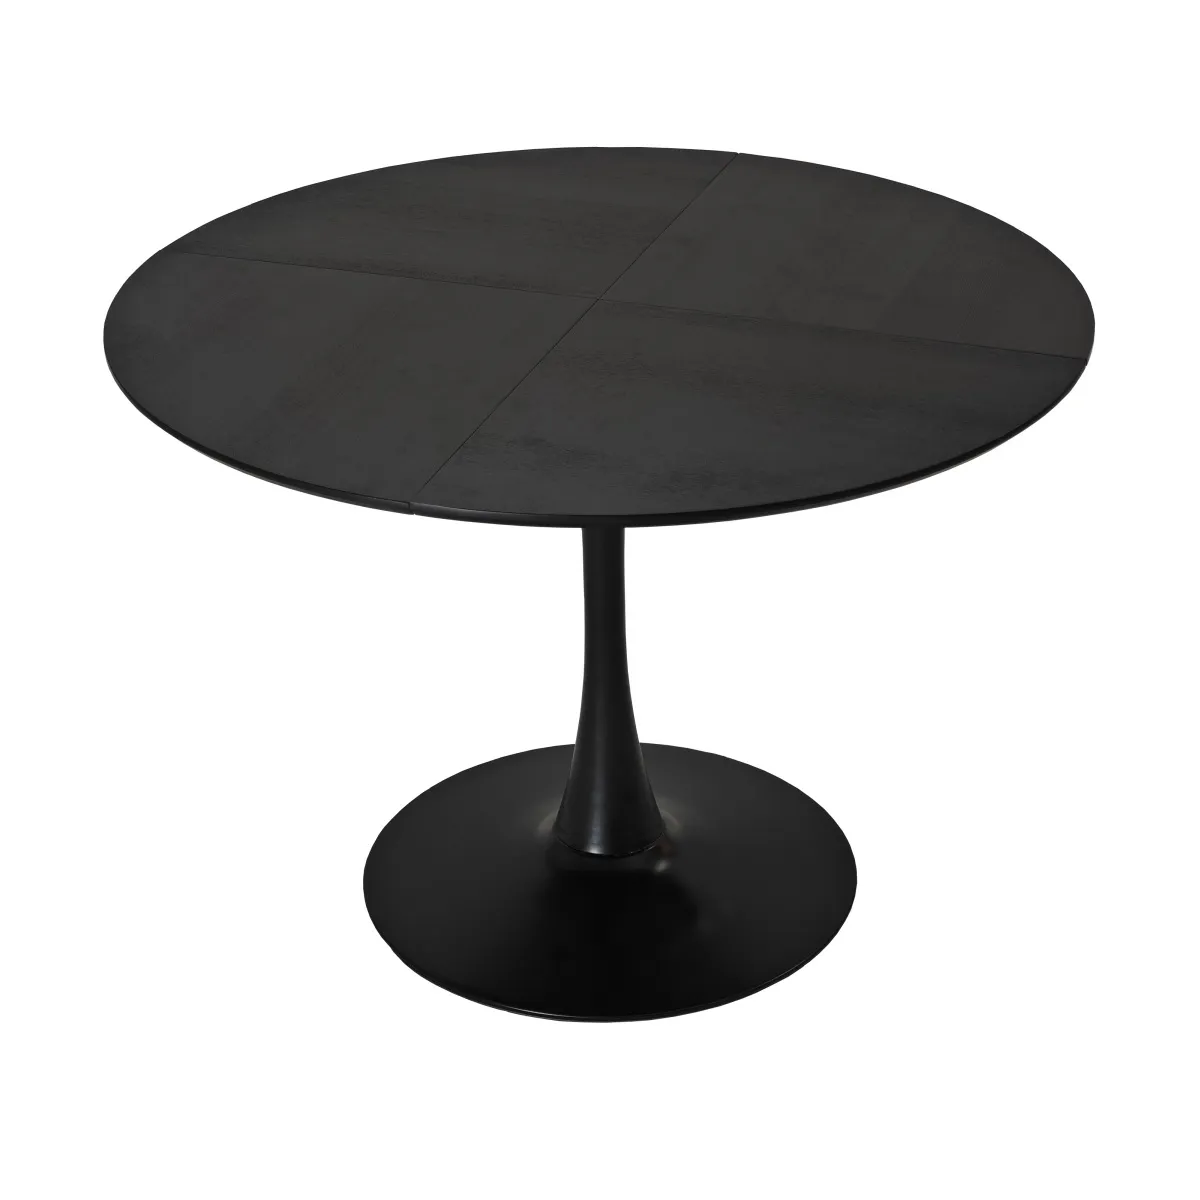 47.24"Modern Round Dining Table, Four Patchwork Tabletops with Black Color Solid Wood Grain Table Top, Metal Base Dining Table, End Table Leisure Coffee Table